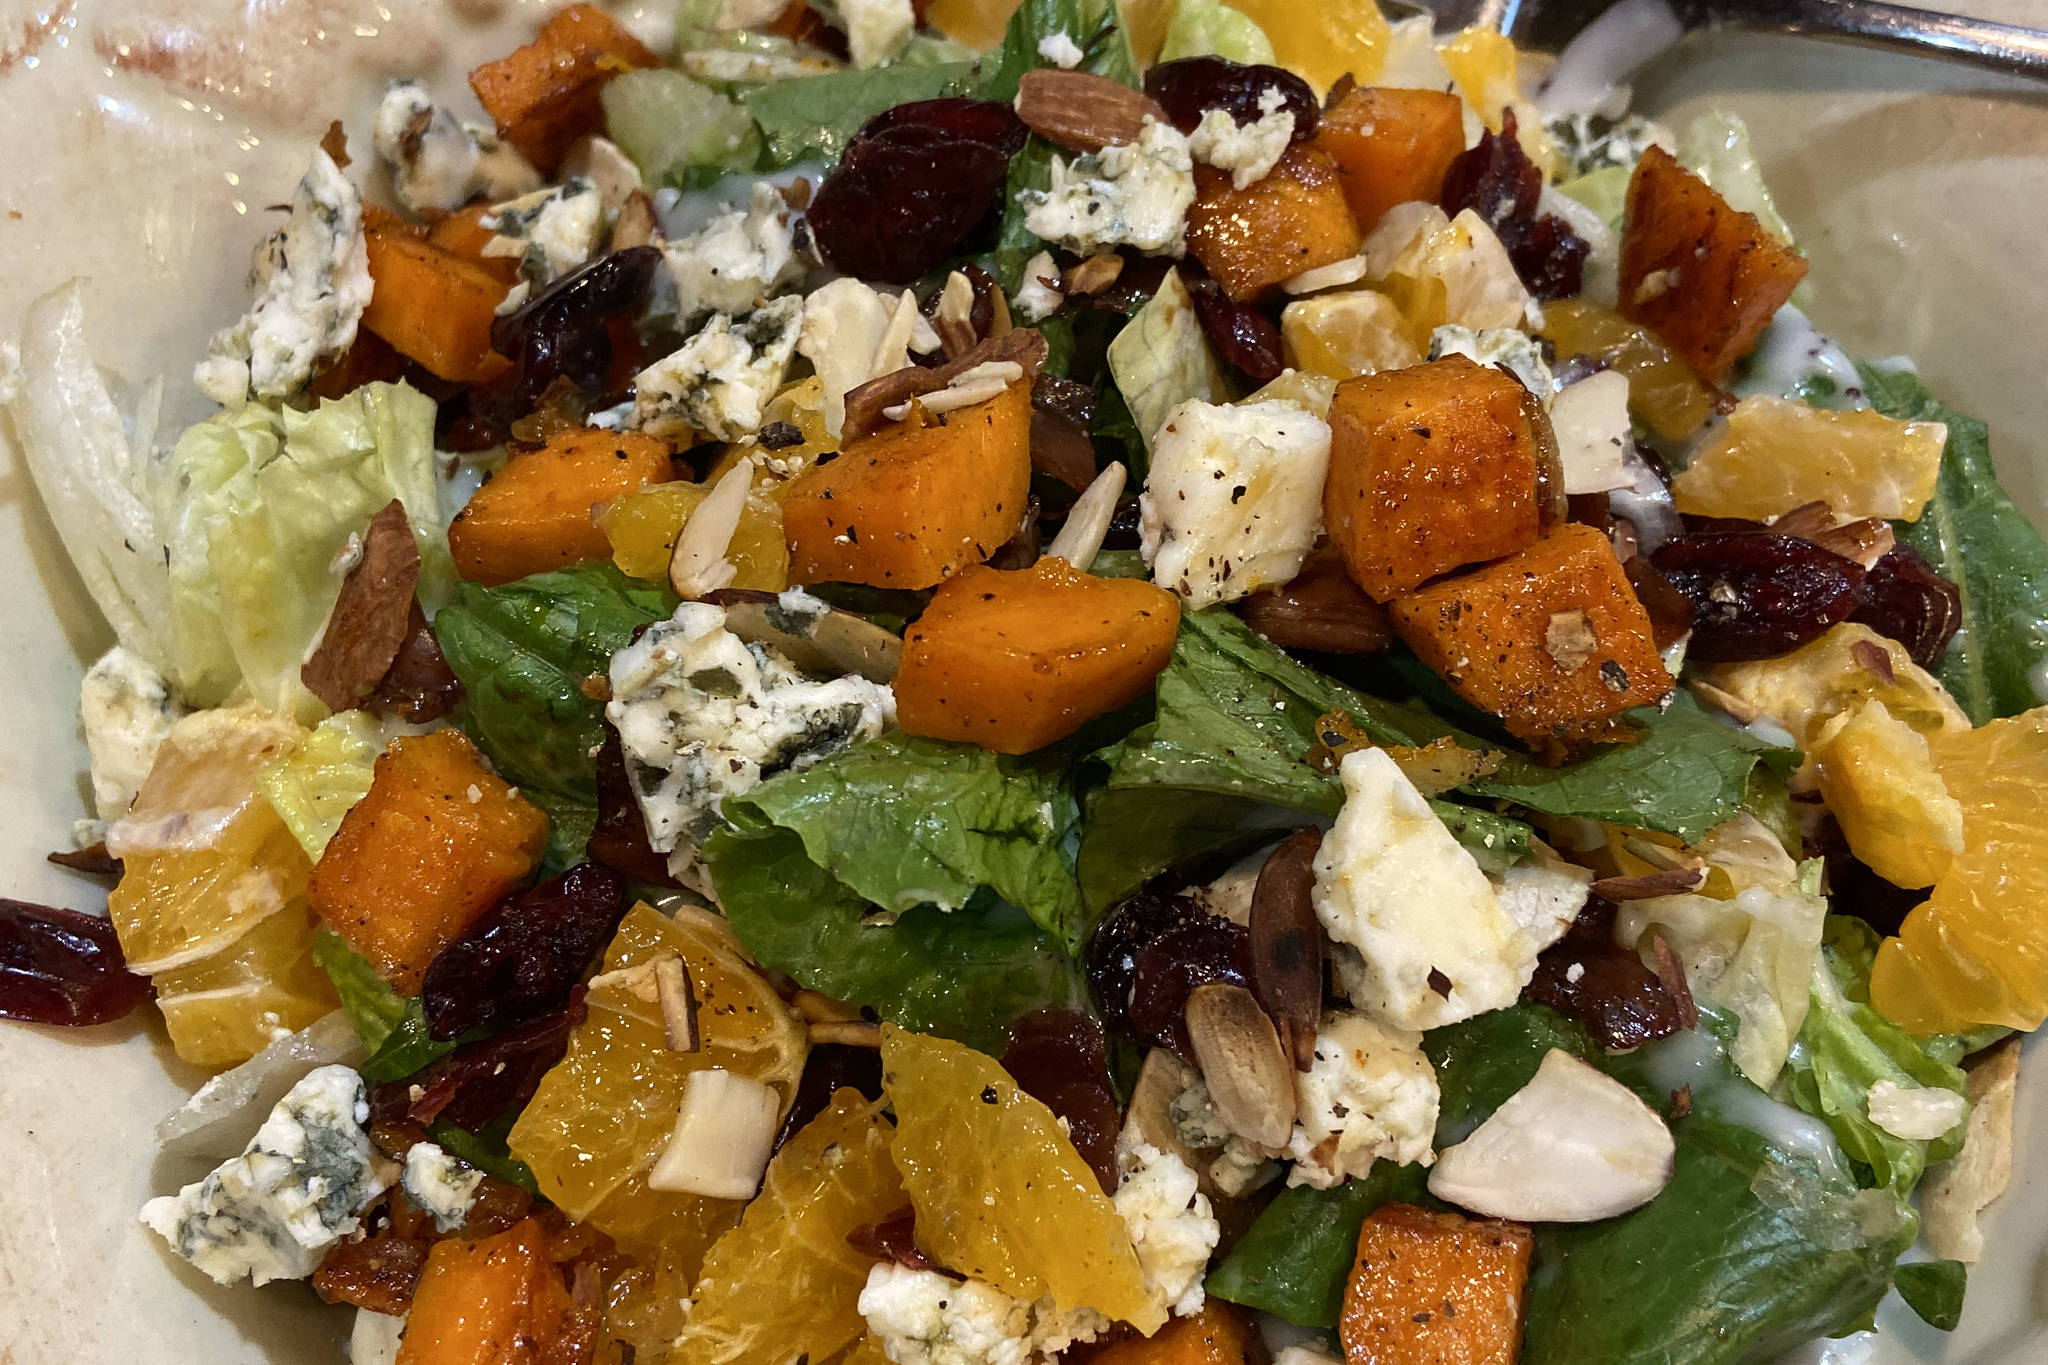 Roasted butternut squash tossed green salad offers a new take on traditional Thanksgiving meal flavors, as seen here ion Nov. 12, 2019, in Teri Robl’s kitchen in Homer, Alaska. (Photo by Teri Robl)